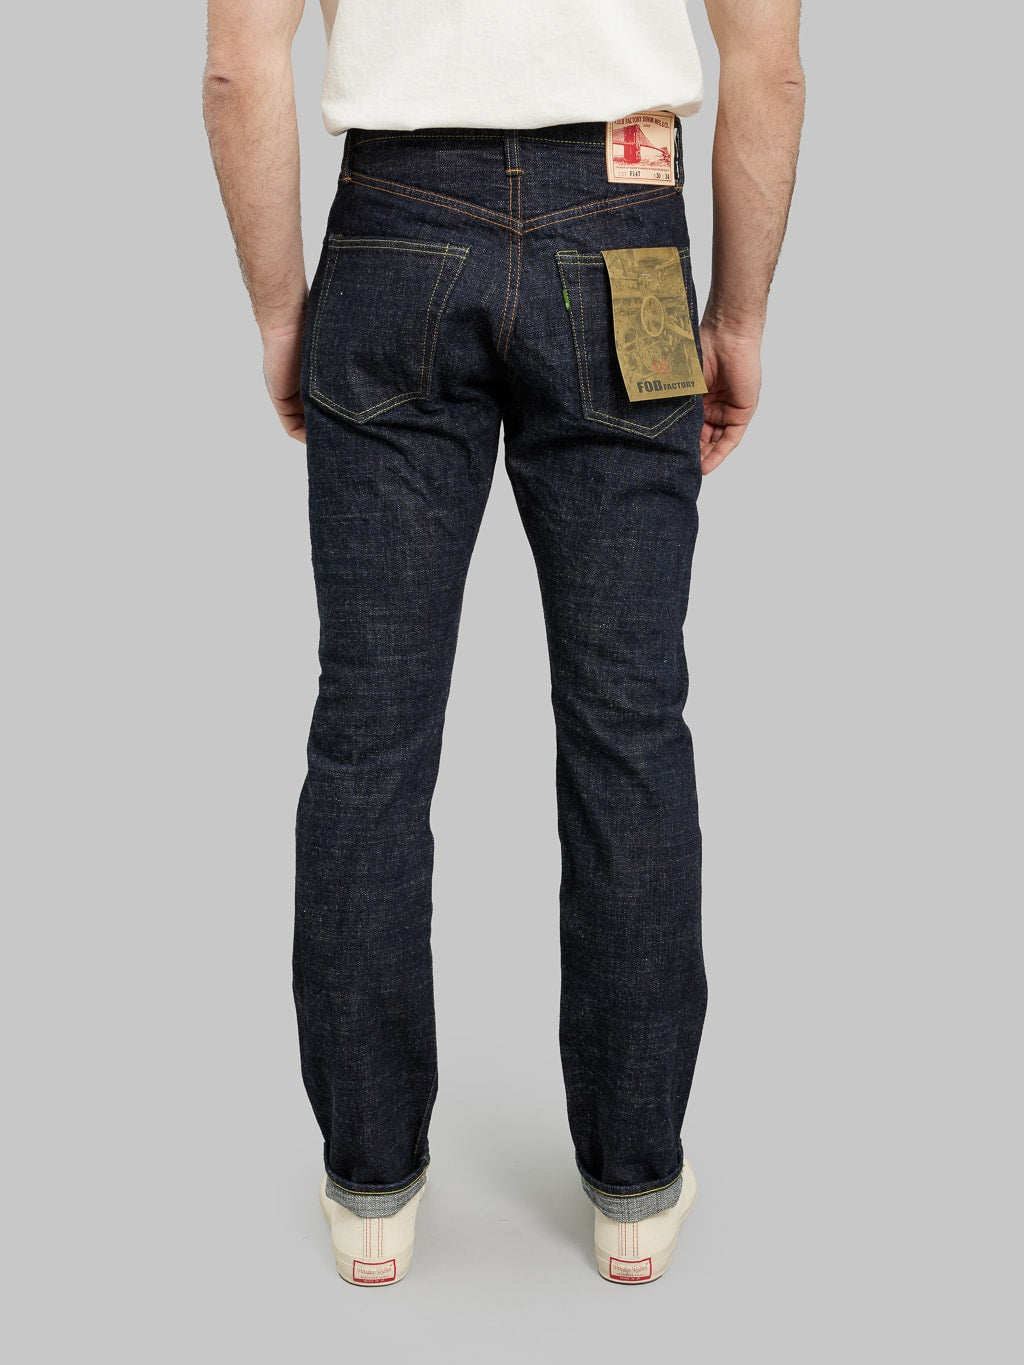 Fob factory slim straight jean back rise